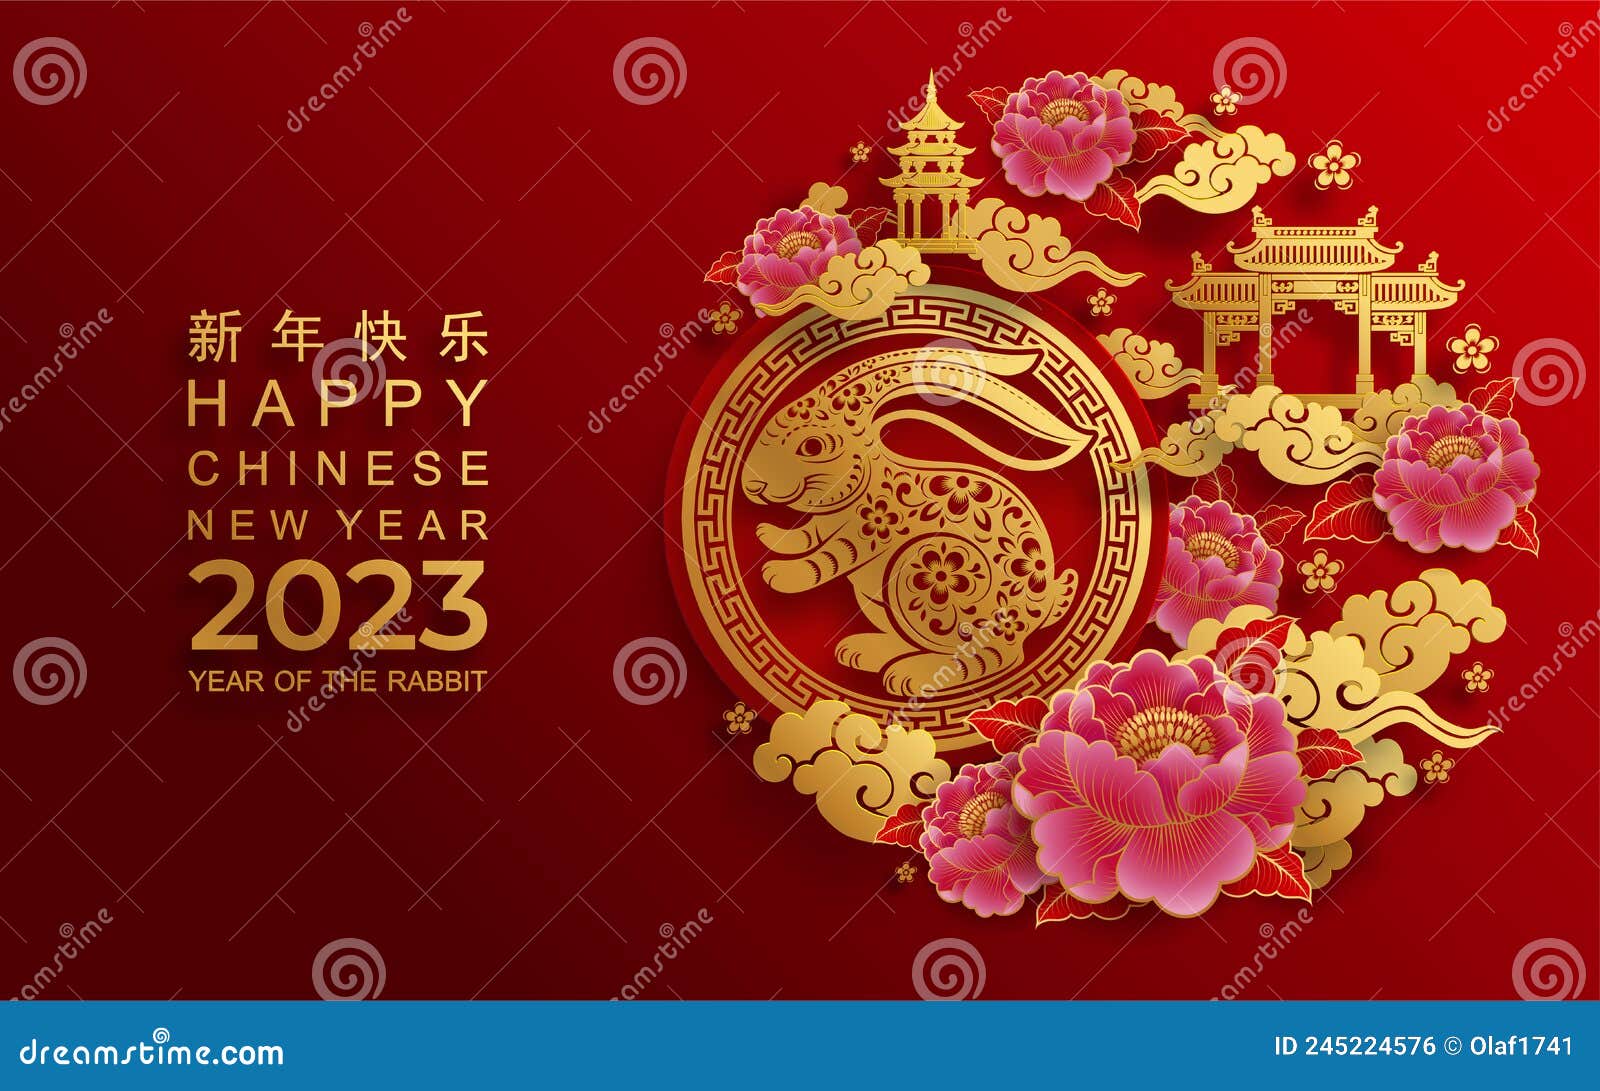 Happy Chinese New Year 2023 Year of the Rabbit Stock Vector ...